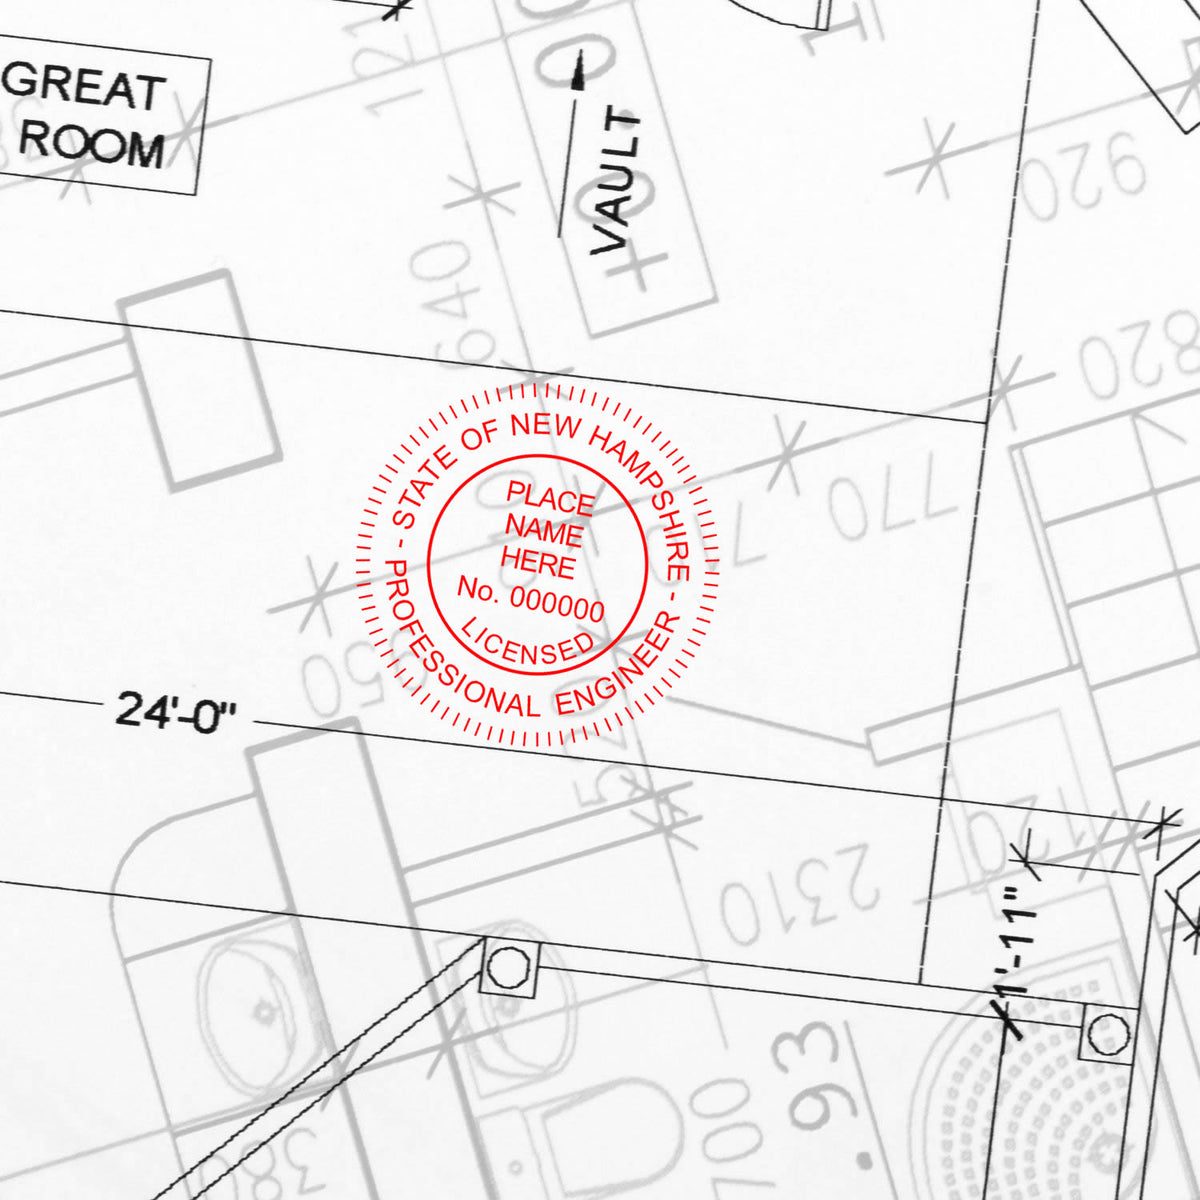 The New Hampshire Professional Engineer Seal Stamp stamp impression comes to life with a crisp, detailed photo on paper - showcasing true professional quality.